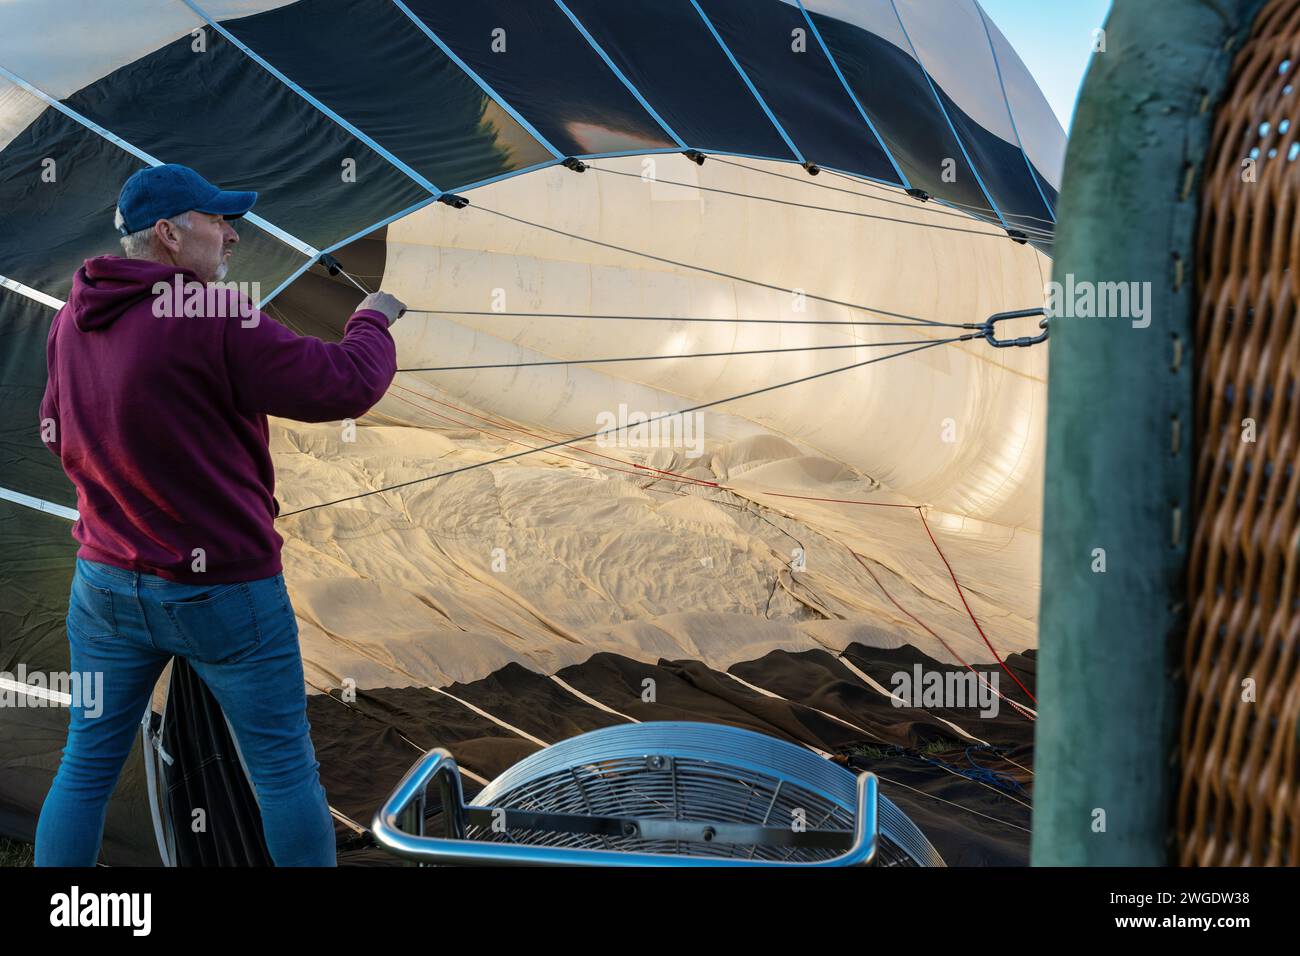 Men prepare a large hot air balloon for flight, one of them adjusts the folds of nylon material inside the balloon. Stock Photo